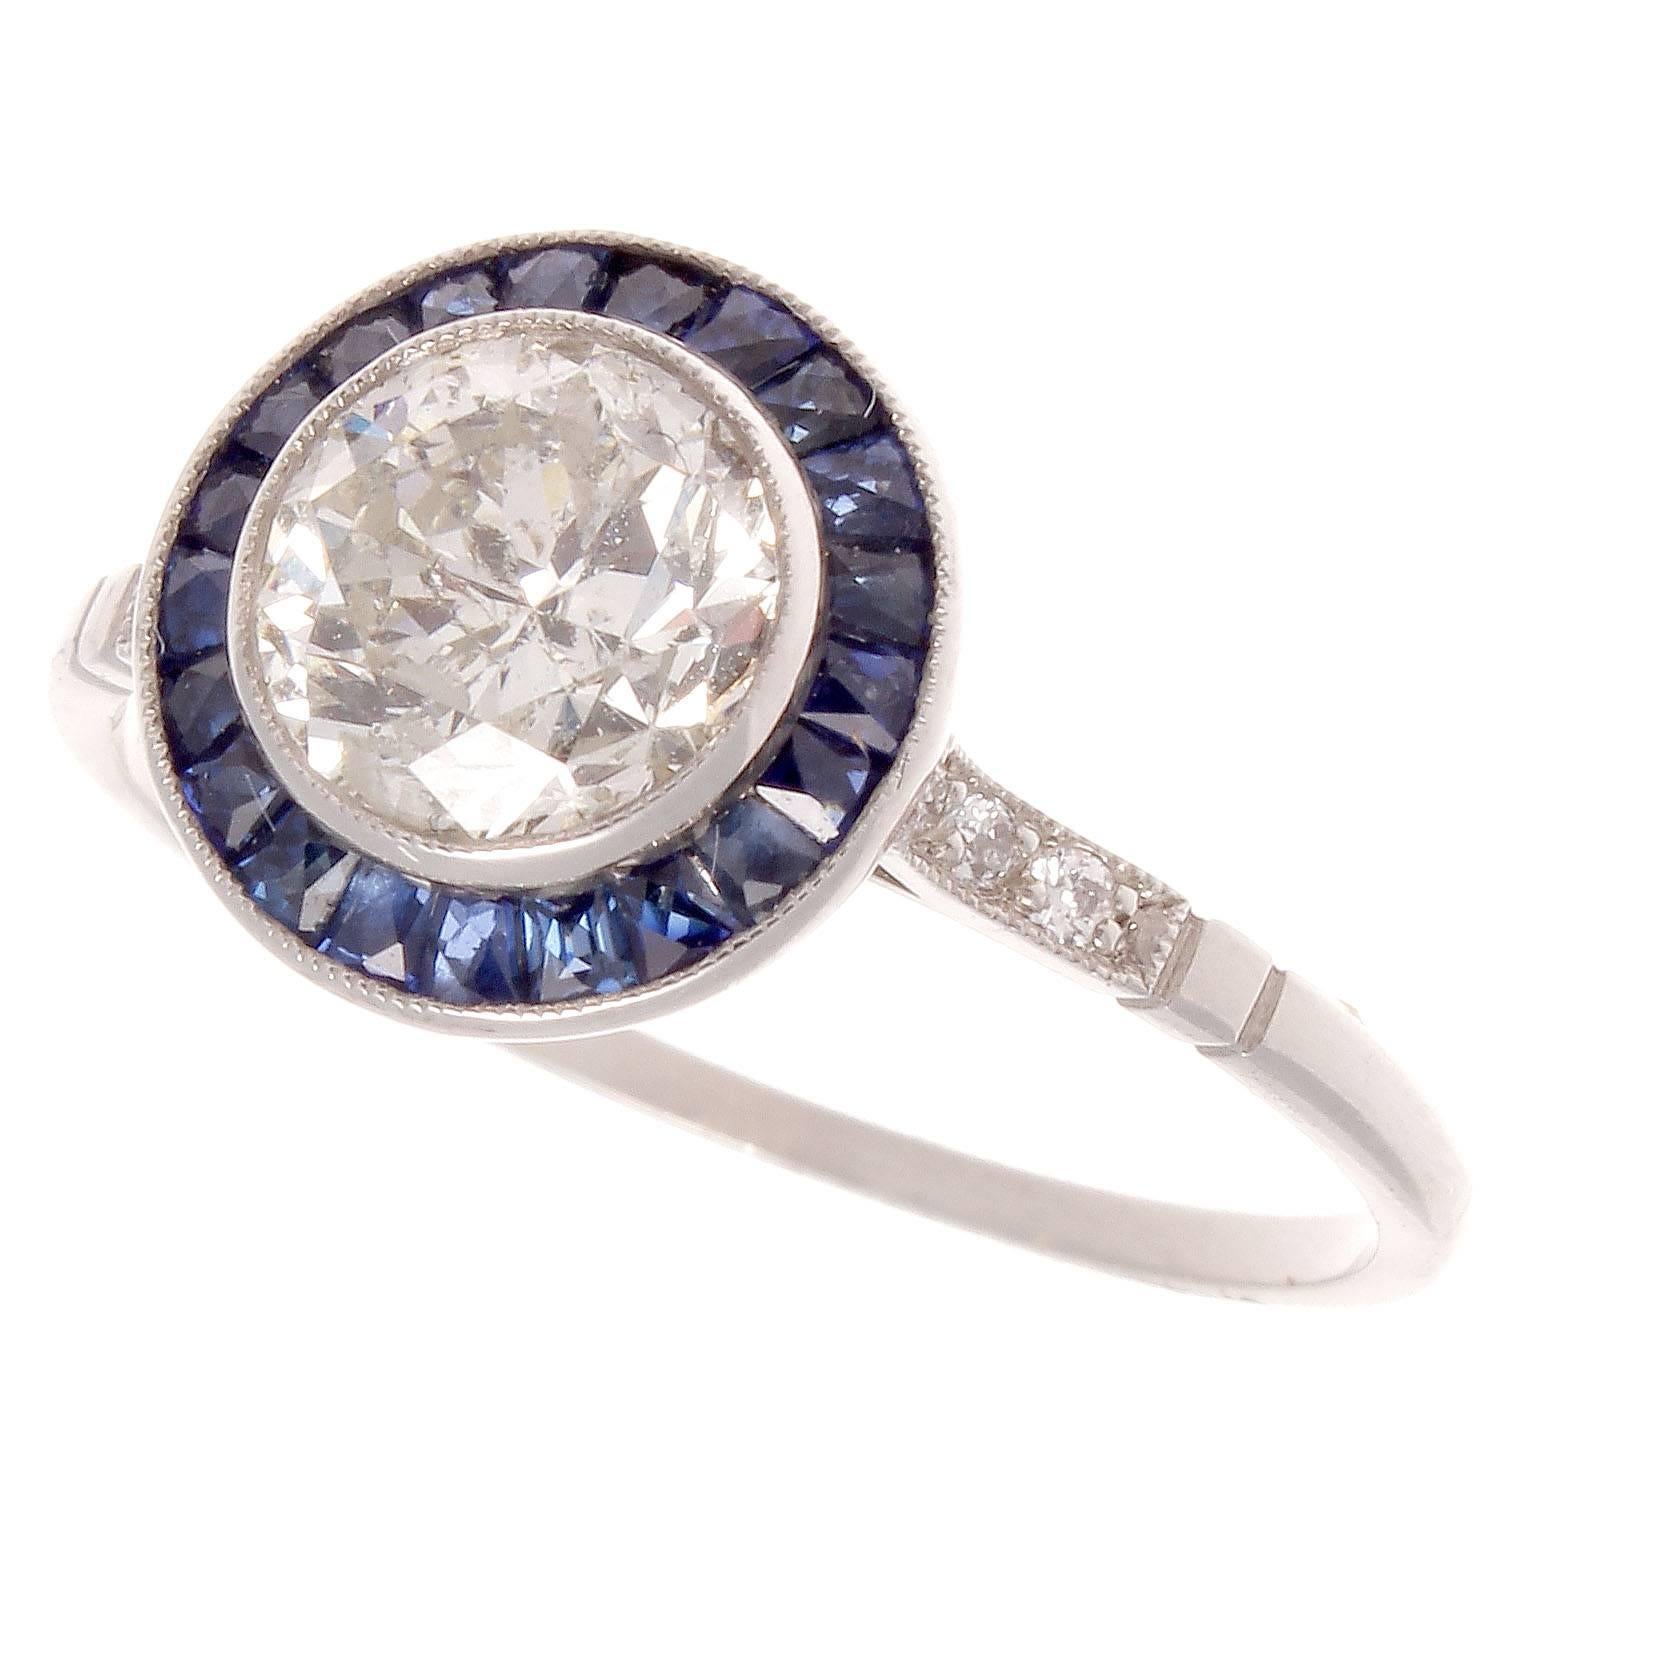 The 1930's is regarded as the golden era of jewelry and has influenced designers to recreate the jewelry from this remarkable time. Featuring a 1.15 carat diamond that is surrounded by a halo of navy blue sapphires. Crafted in platinum. 